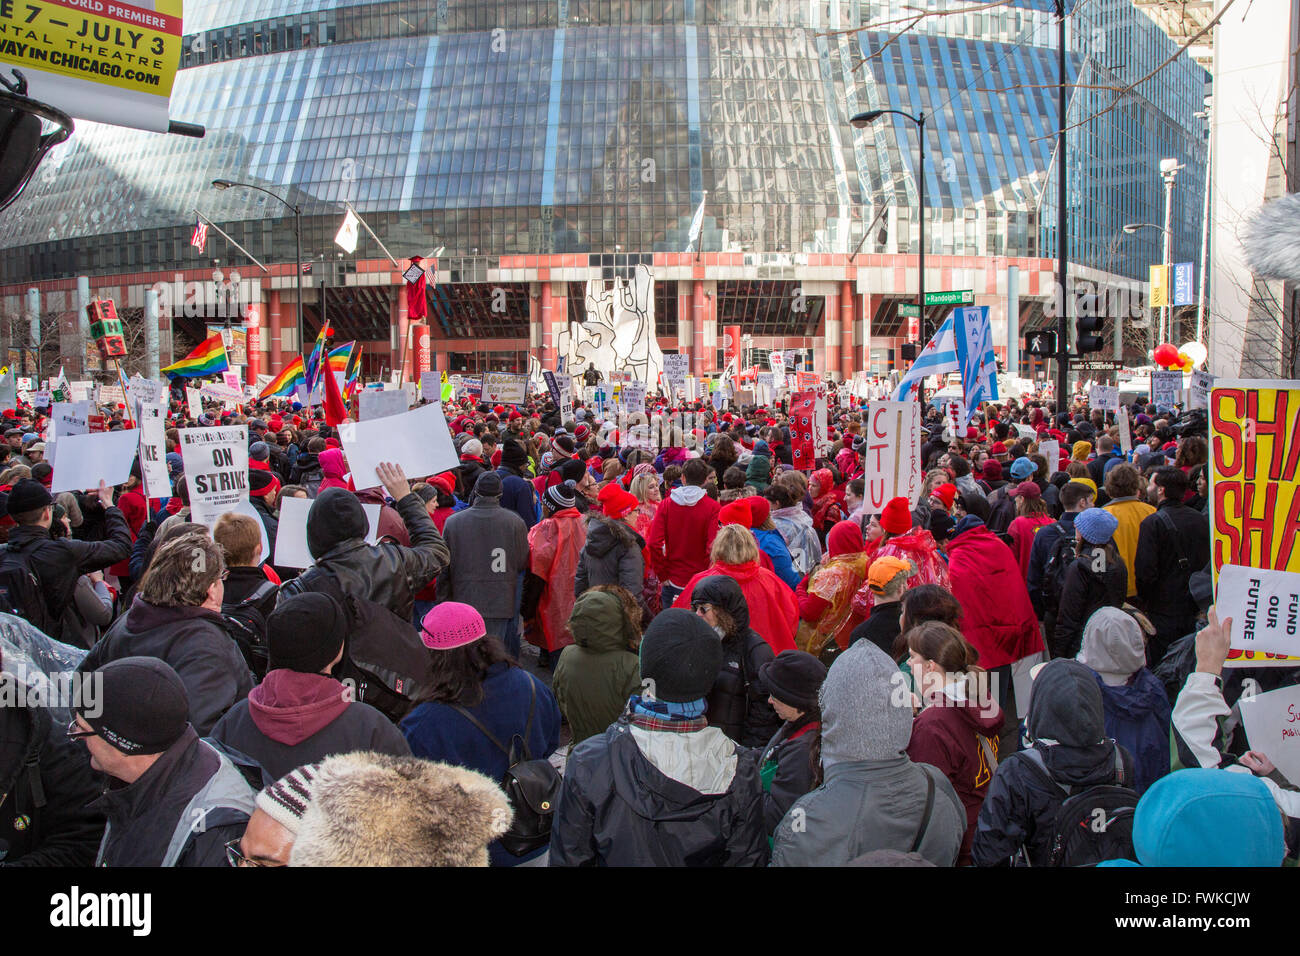 Chicago, Illinois - Members of the Chicago Teachers Union strike for increased funding for the city's public schools. Stock Photo